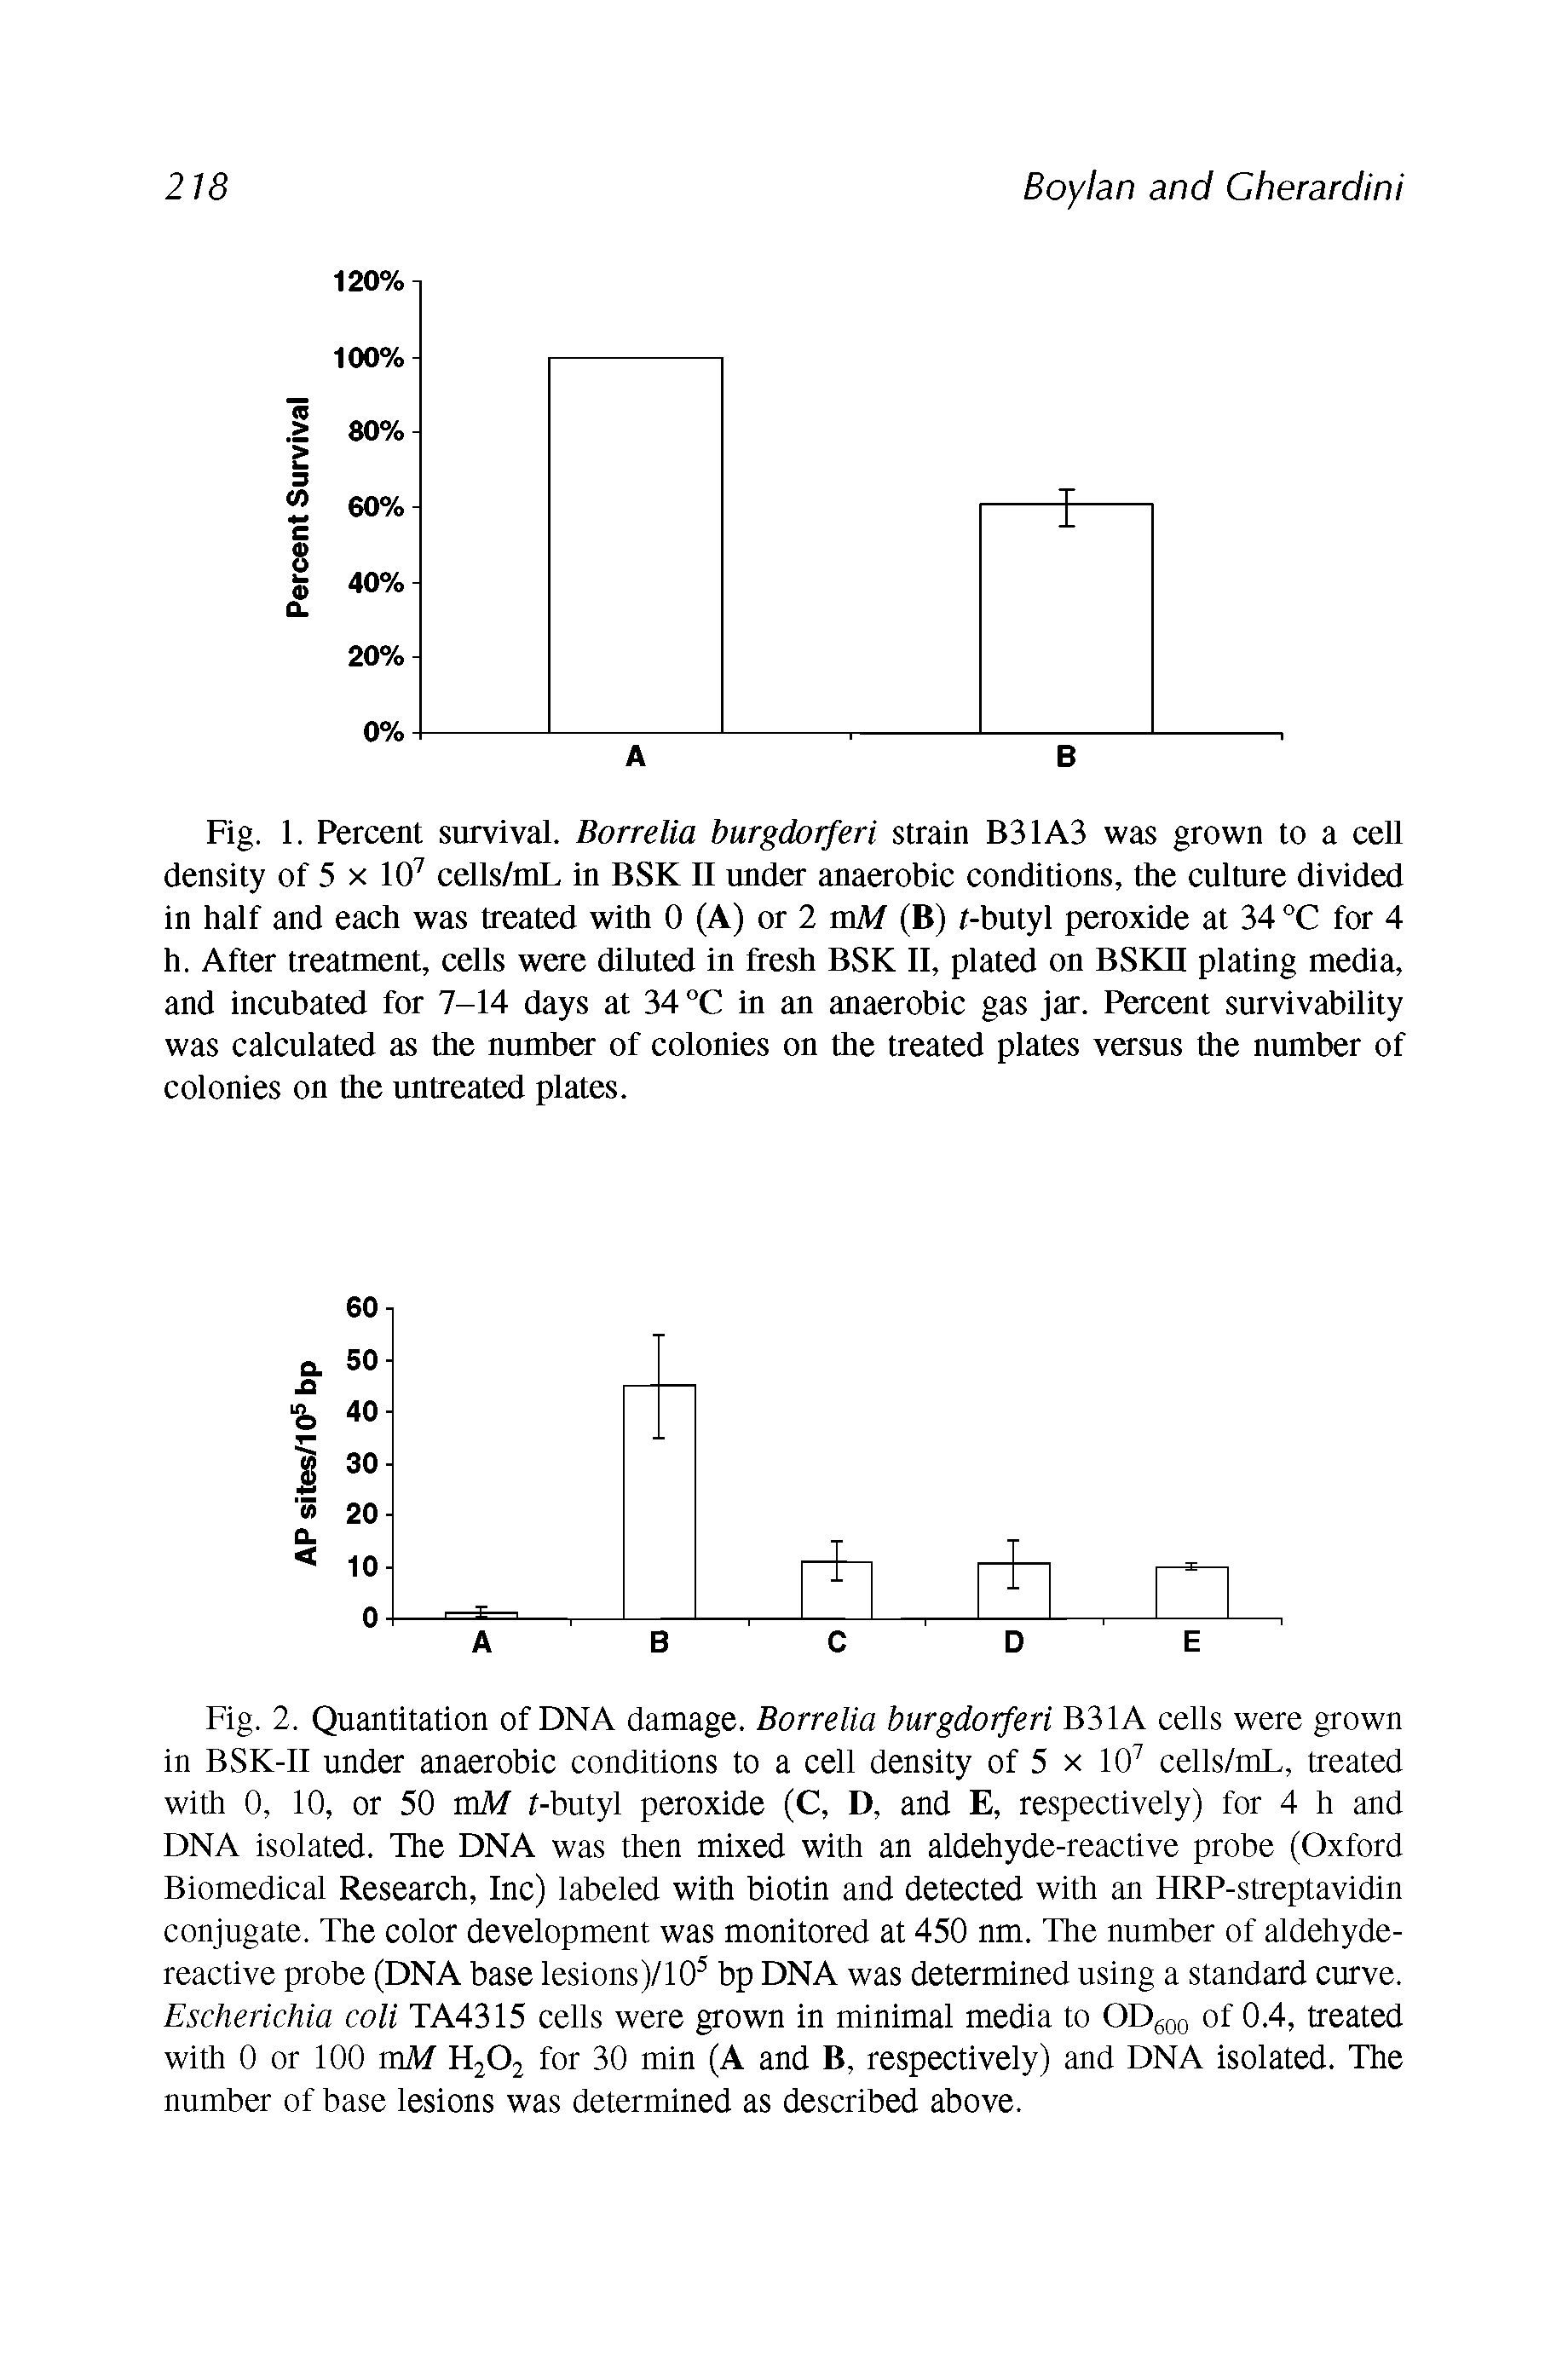 Fig. 2. Quantitation of DNA damage. Borrelia burgdorferi B31A cells were grown in BSK-II under anaerobic conditions to a cell density of 5 x 10 cells/mL, treated with 0, 10, or 50 mM f-butyl peroxide (C, D, and E, respectively) for 4 h and DNA isolated. The DNA was then mixed with an aldehyde-reactive probe (Oxford Biomedical Research, Inc) labeled with biotin and detected with an HRP-streptavidin conjugate. The color development was monitored at 450 nm. The number of aldehyde-reactive probe (DNA base lesions)/10 bp DNA was determined using a standard curve. Escherichia coli TA4315 cells were grown in minimal media to ODgoo of 0.4, treated with 0 or 100 mM H2O2 for 30 min (A and B, respectively) and DNA isolated. The number of base lesions was determined as described above.